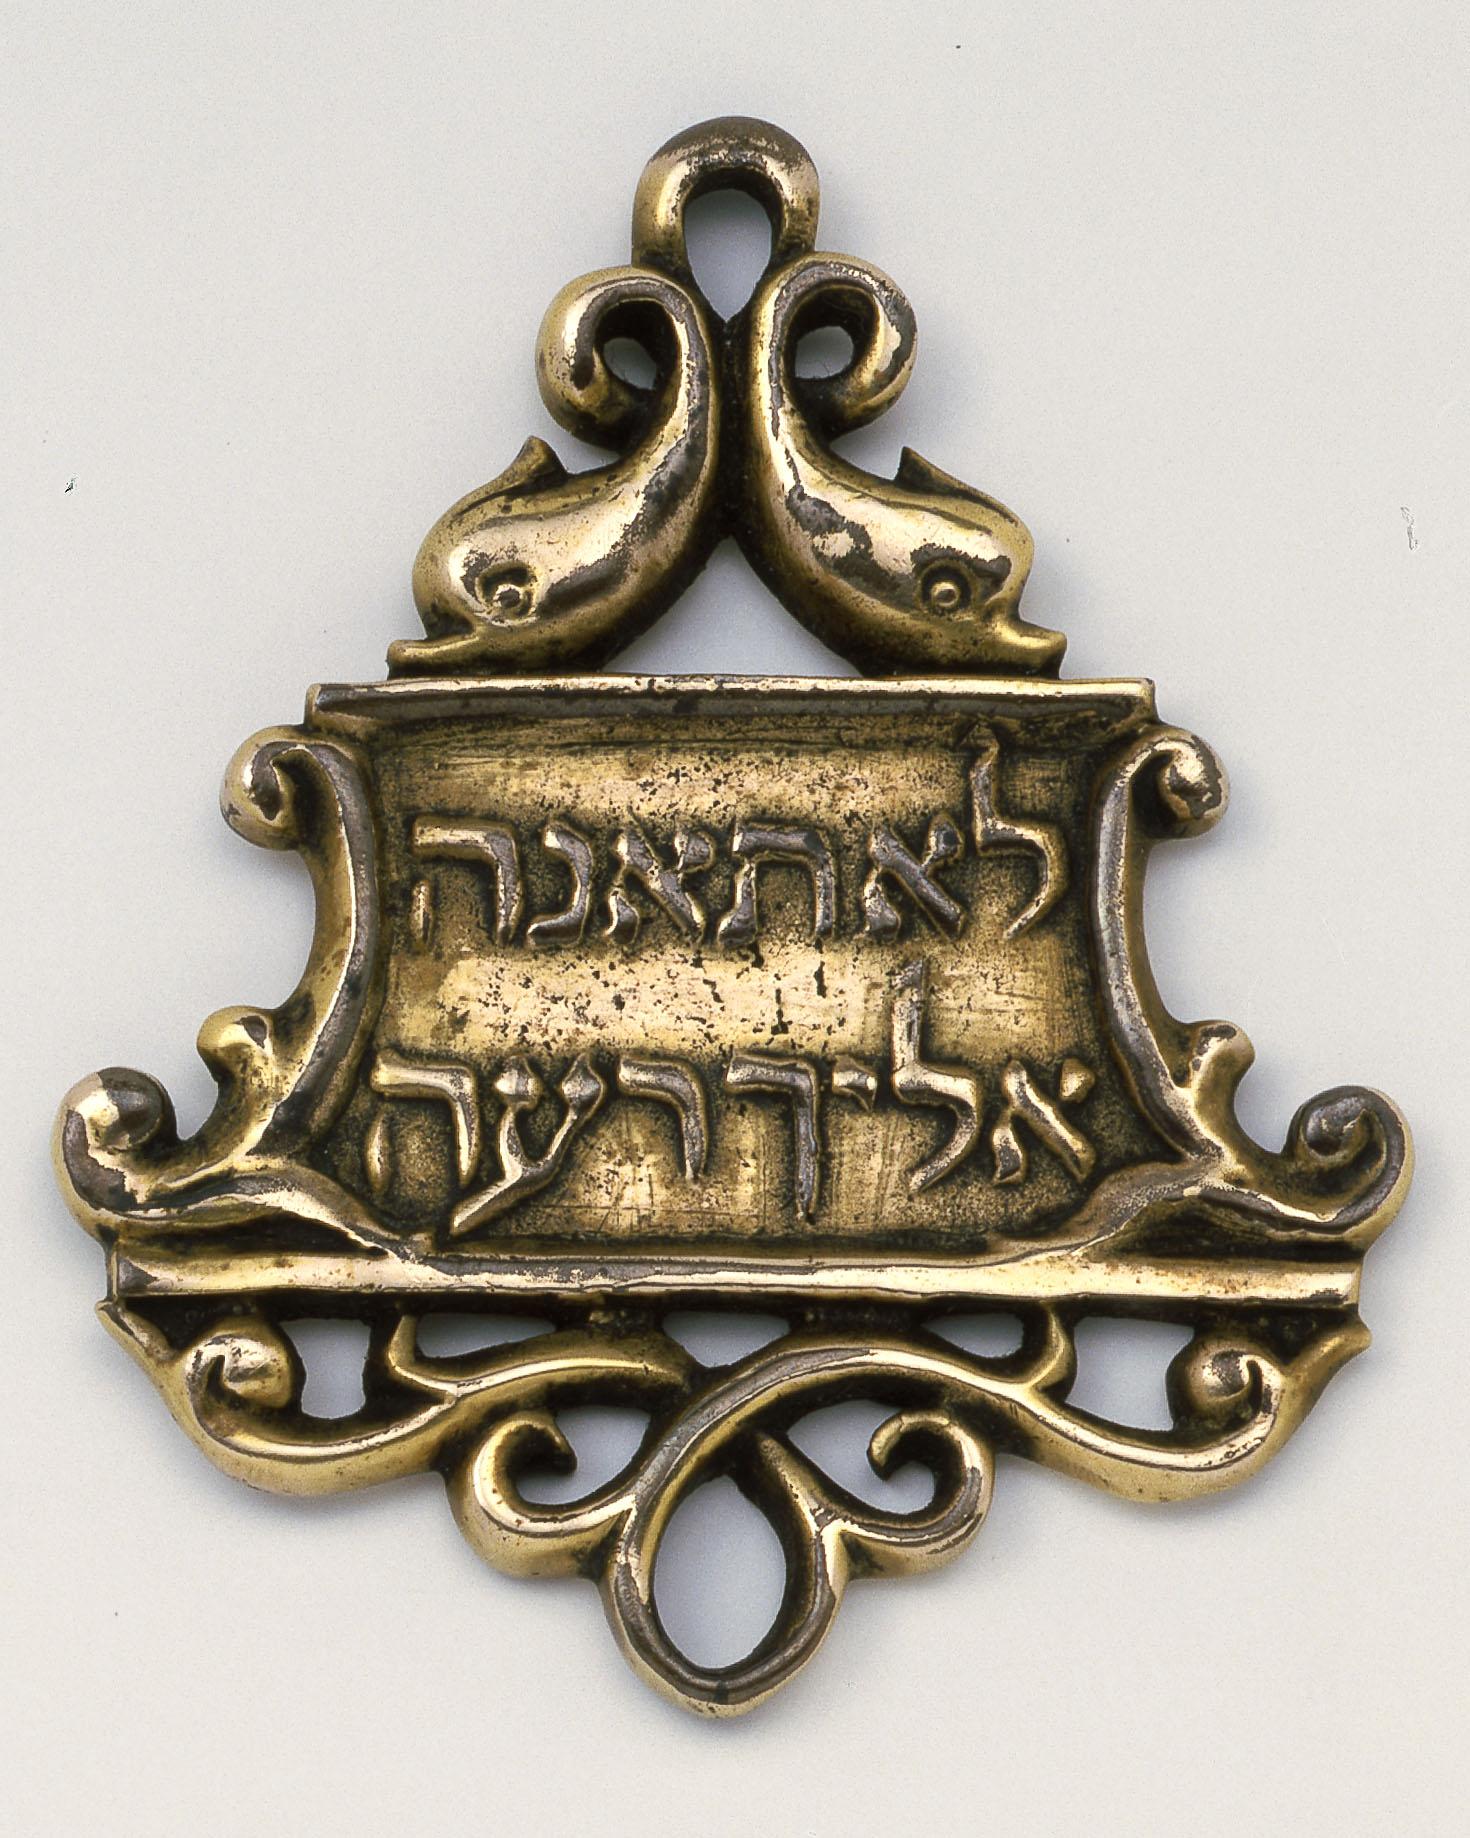 Bronze amulet with decorative border and Hebrew inscription.